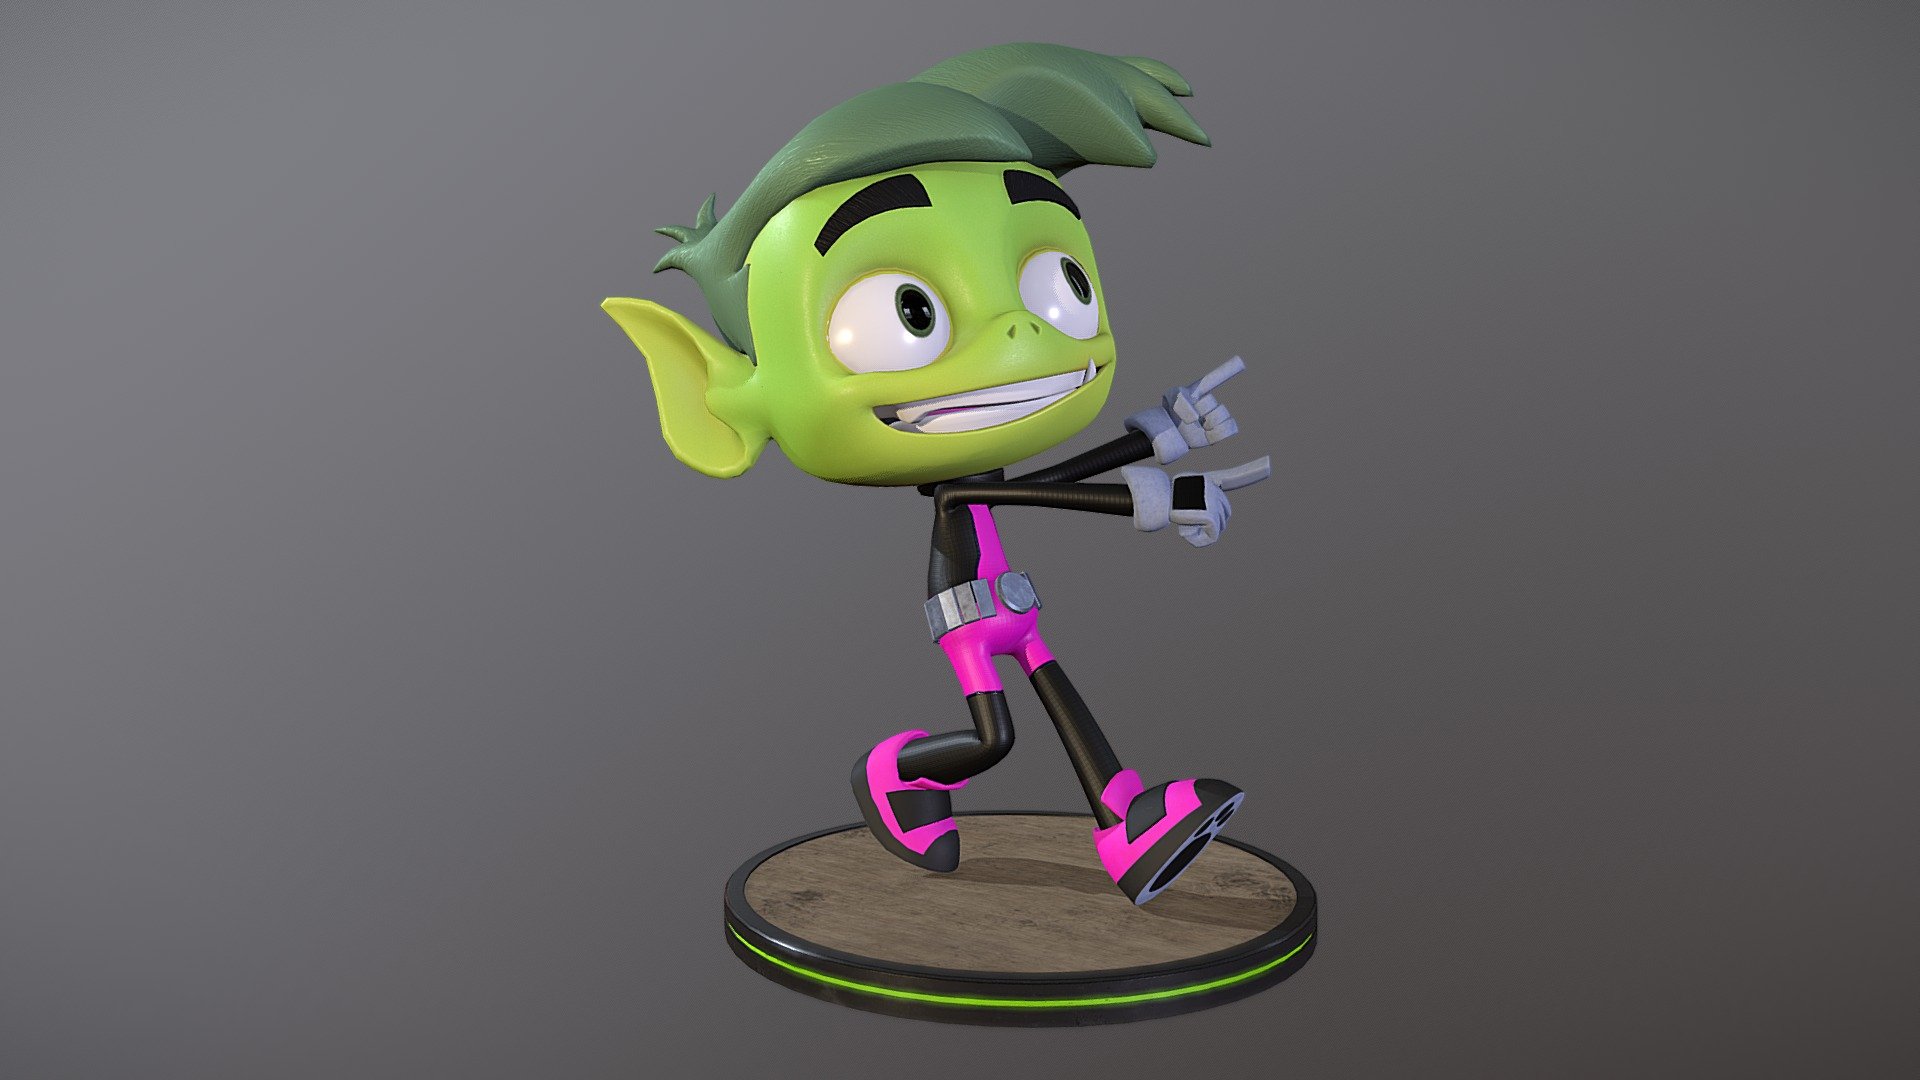 Beast Boy from the Animated TV Show &ldquo;Teen Titans Go!